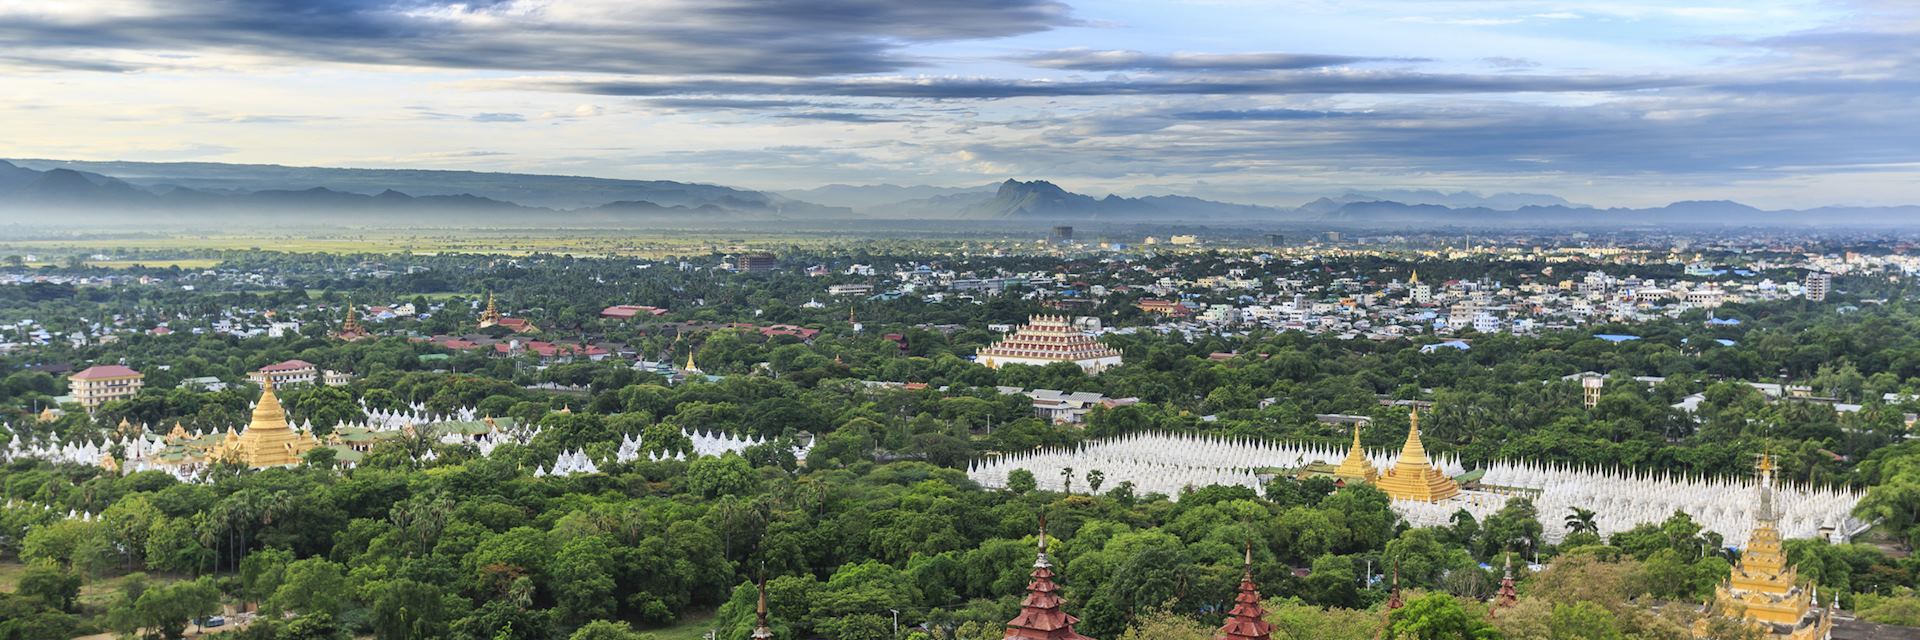 Visit Mandalay, Myanmar | Tailor-Made Vacations | Audley Travel